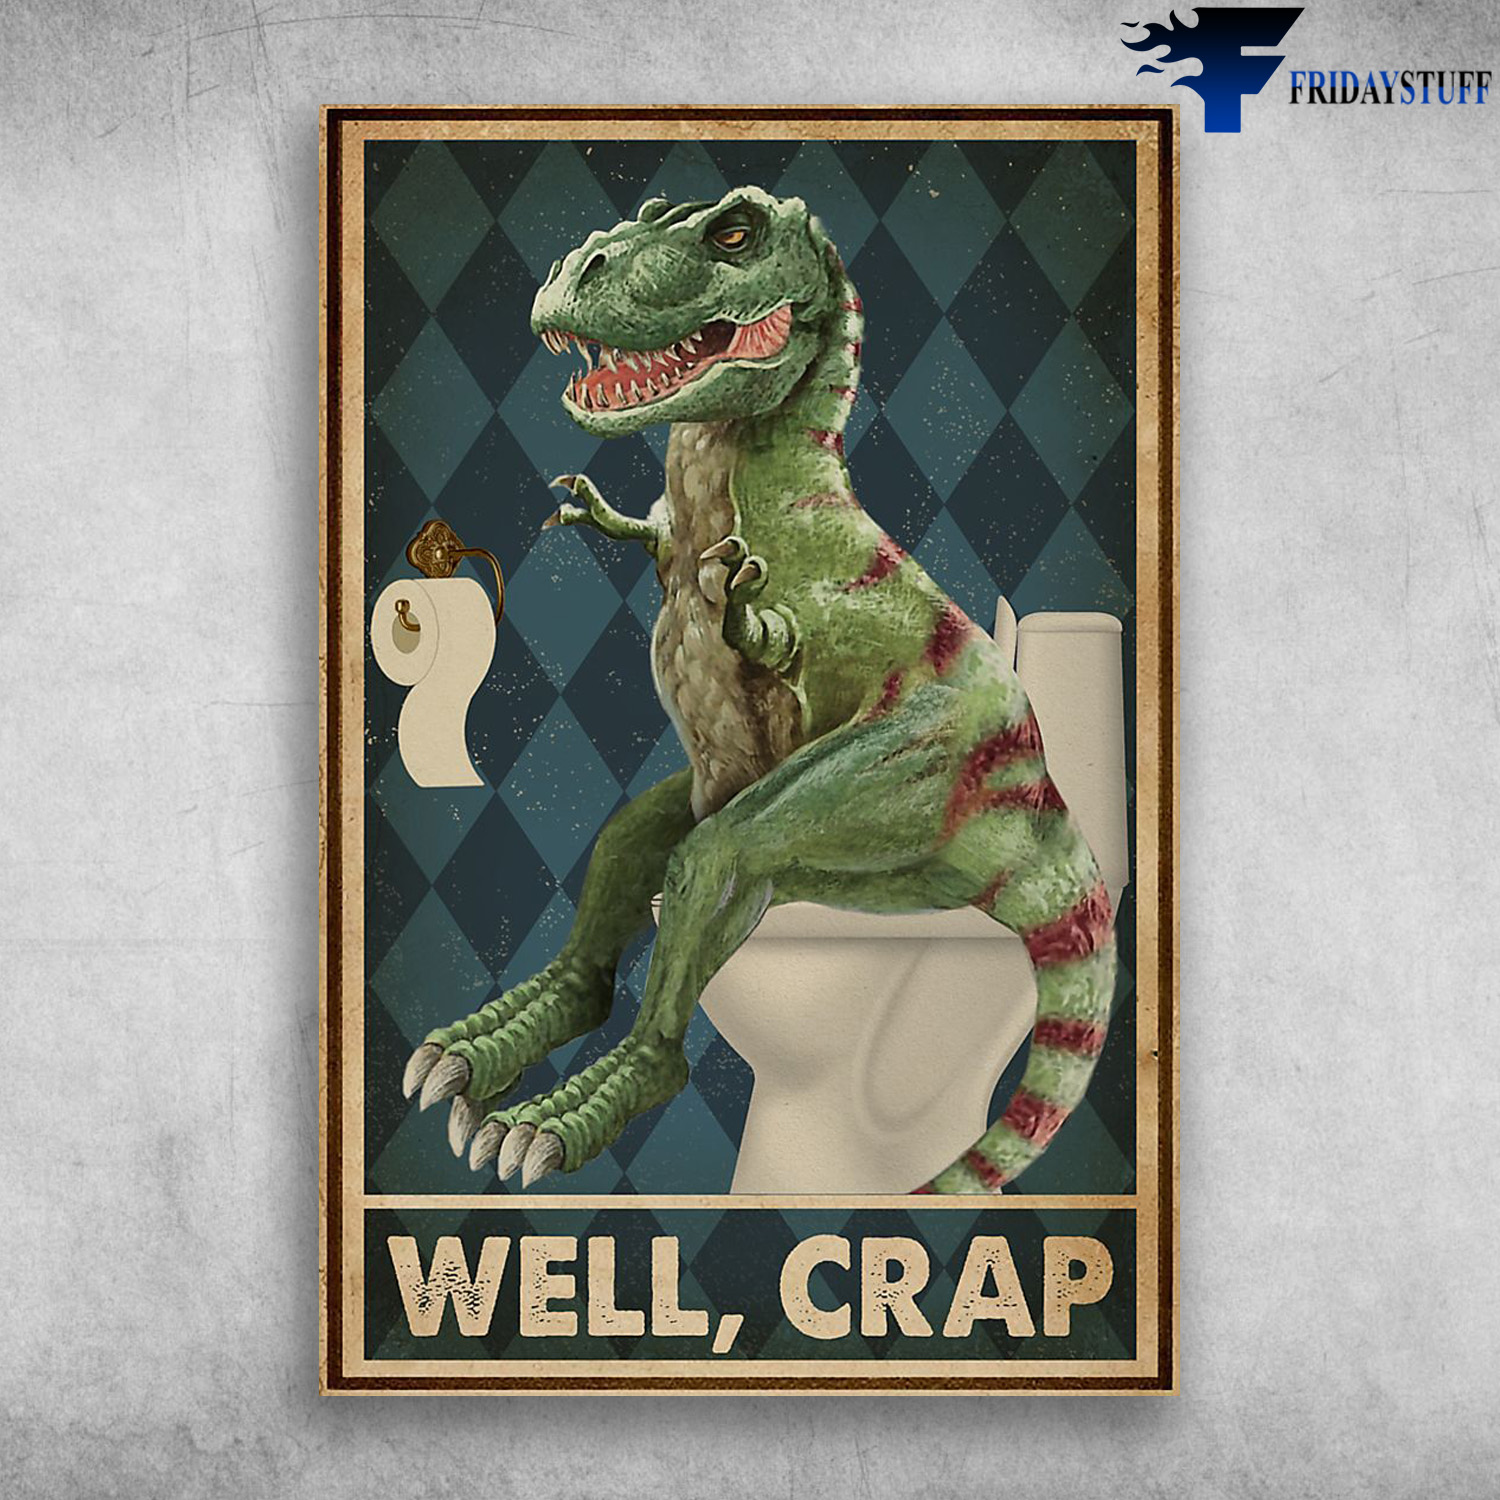 Dinosaur T-rex And In Toilet - Well Crap